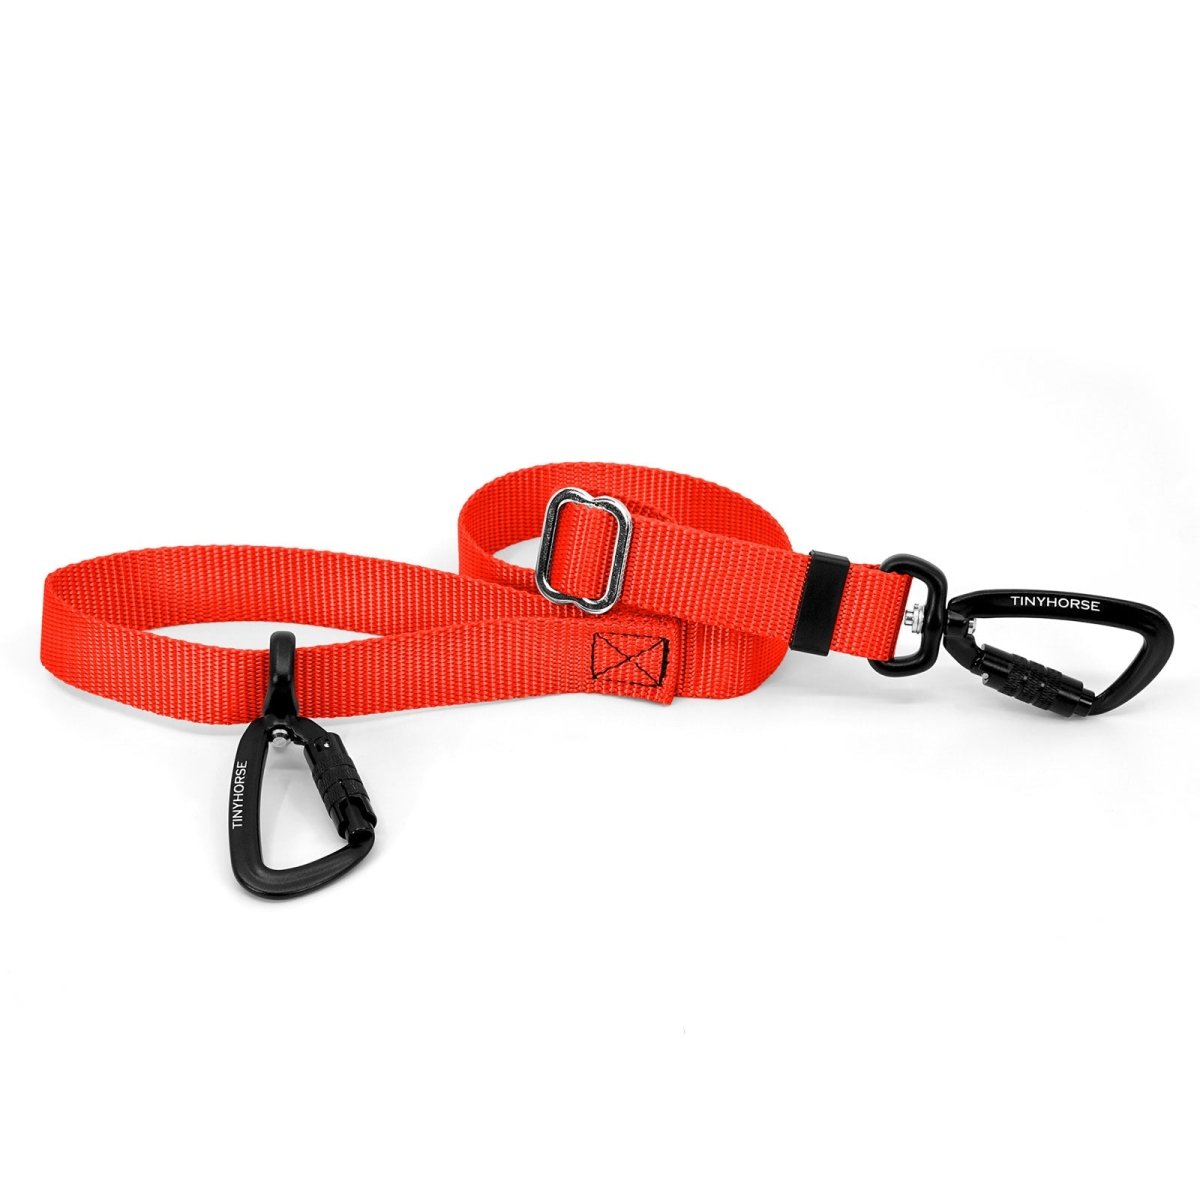 A neon orange-coloured Lead-All Lite with an adjustable nylon webbing leash and 2 auto-locking carabiners